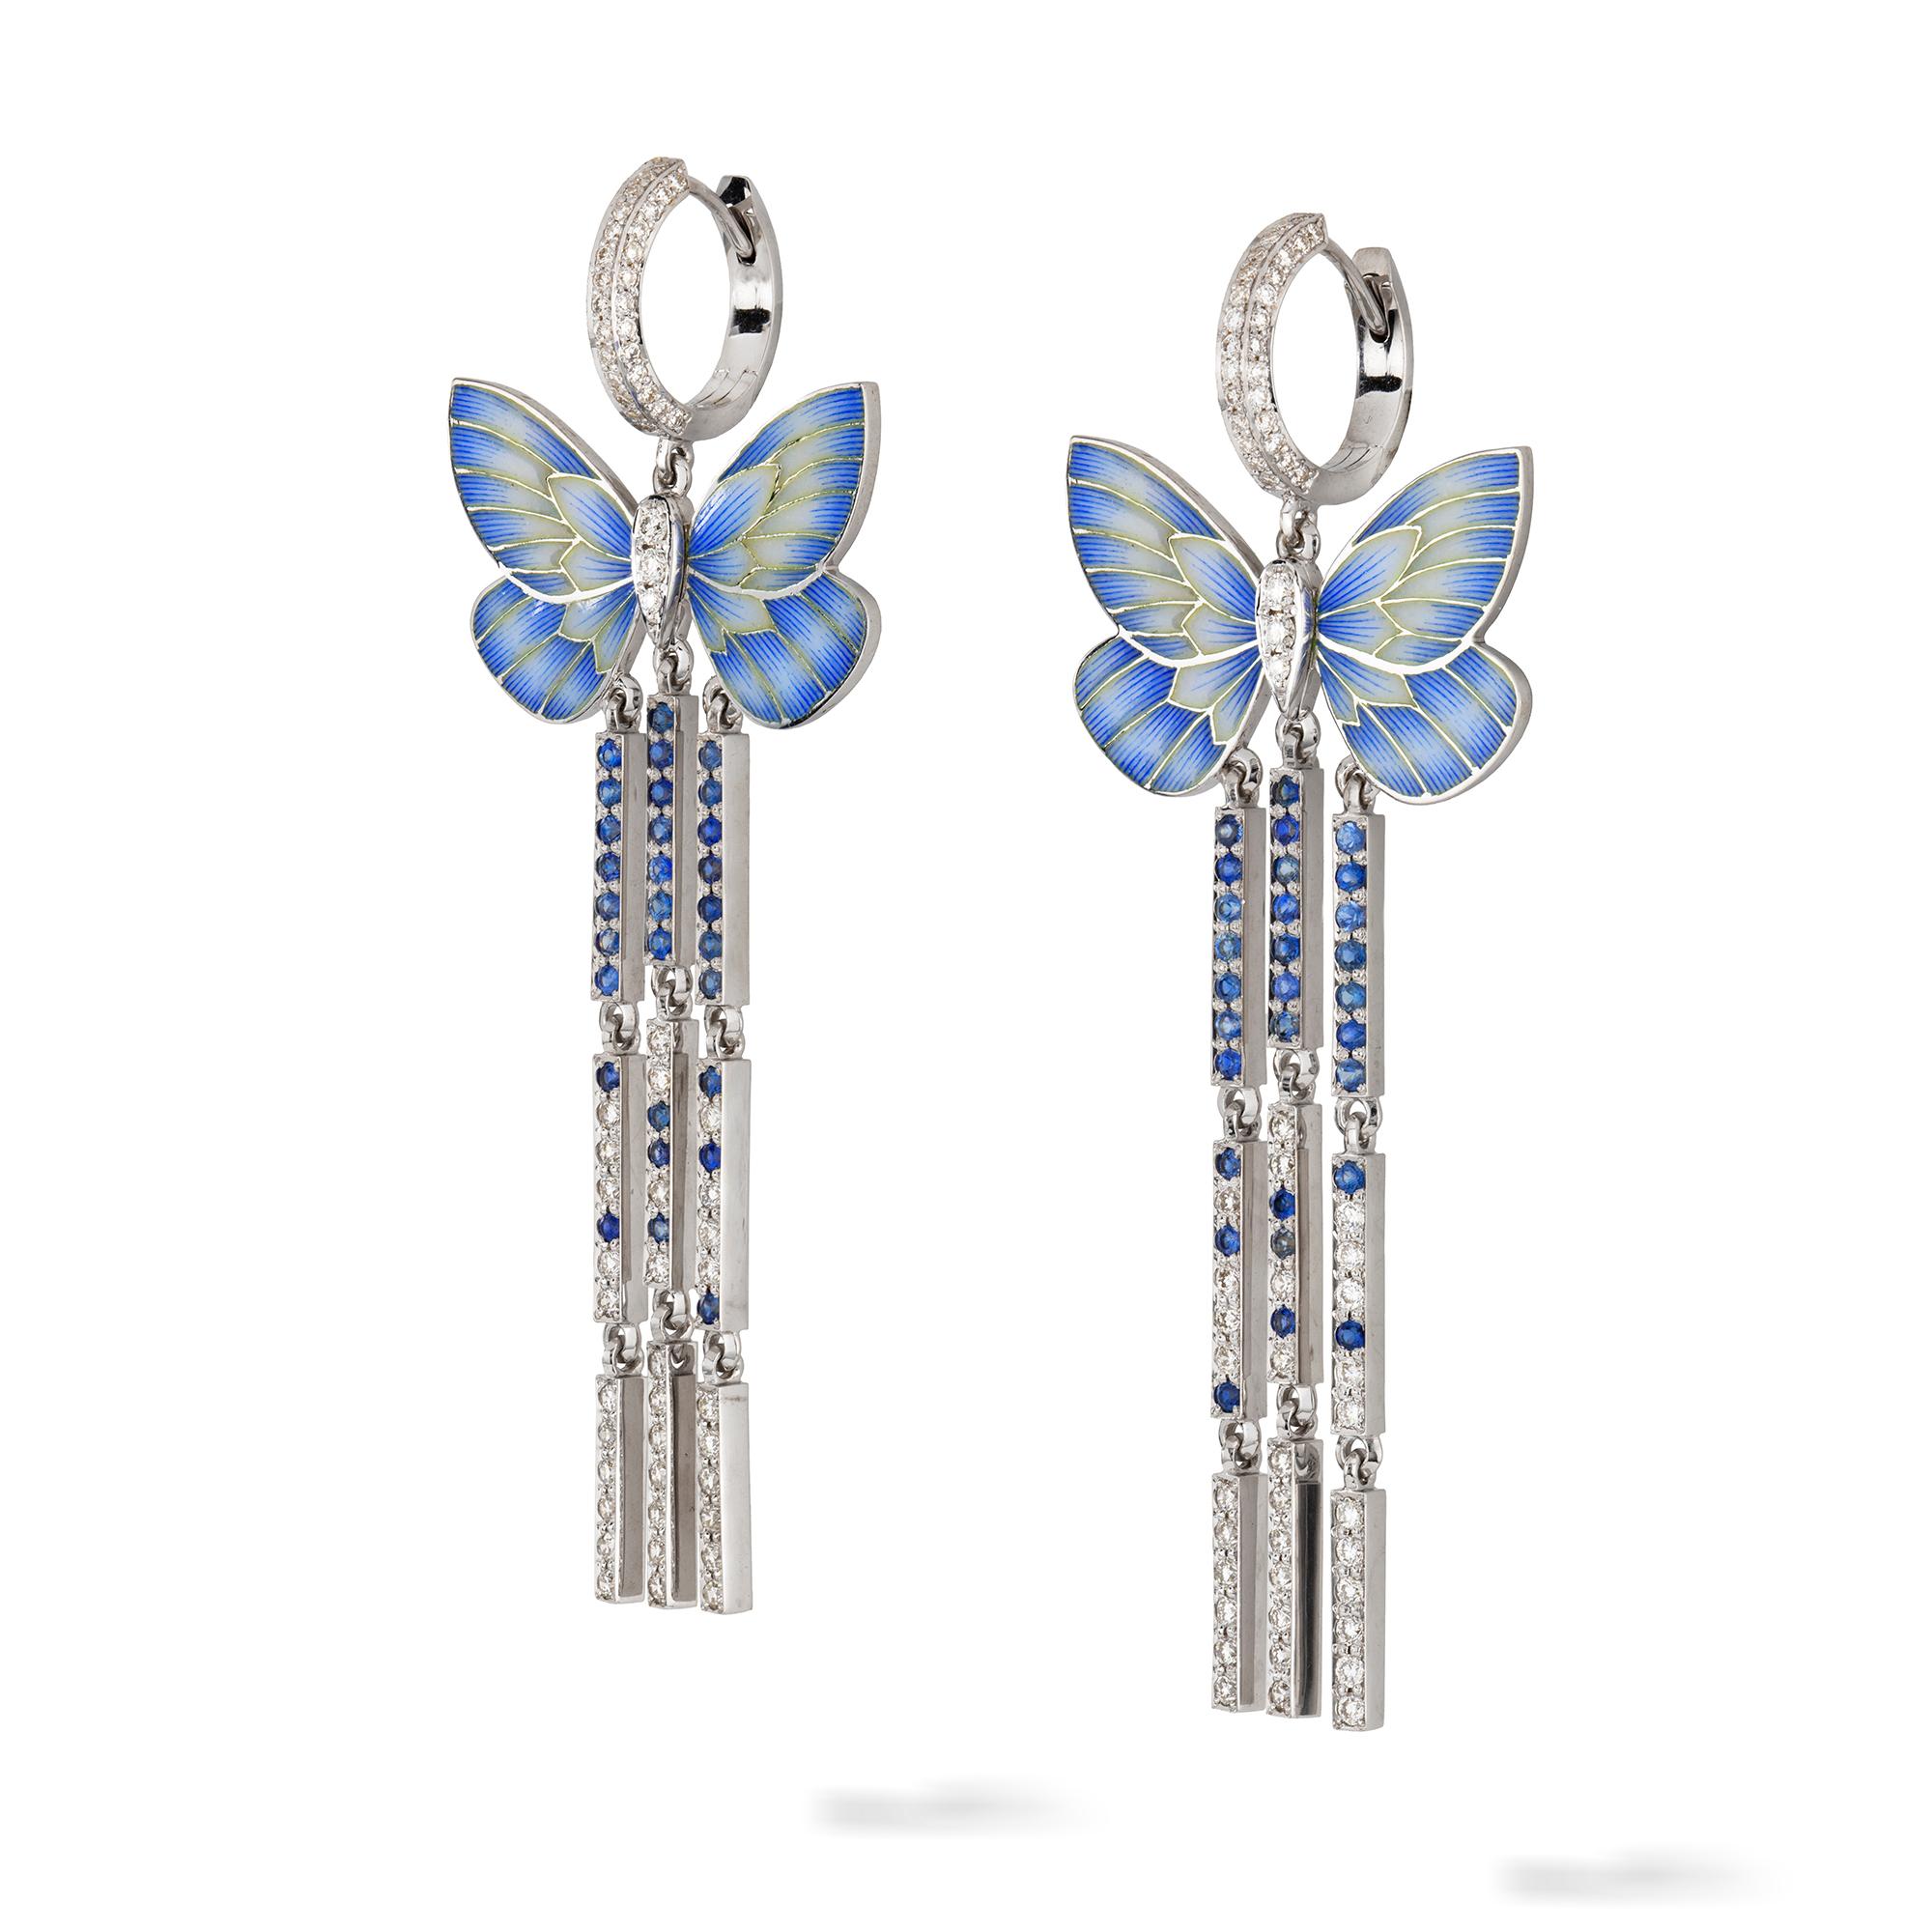 A pair of blue butterfly earrings by Ilgiz F, each earring with a champlevé enameled butterfly, terminating to three sapphire and diamond set fringes, suspended by a diamond-set loop, the diamonds weighing 1.56 carats in total and the sapphires 1.16